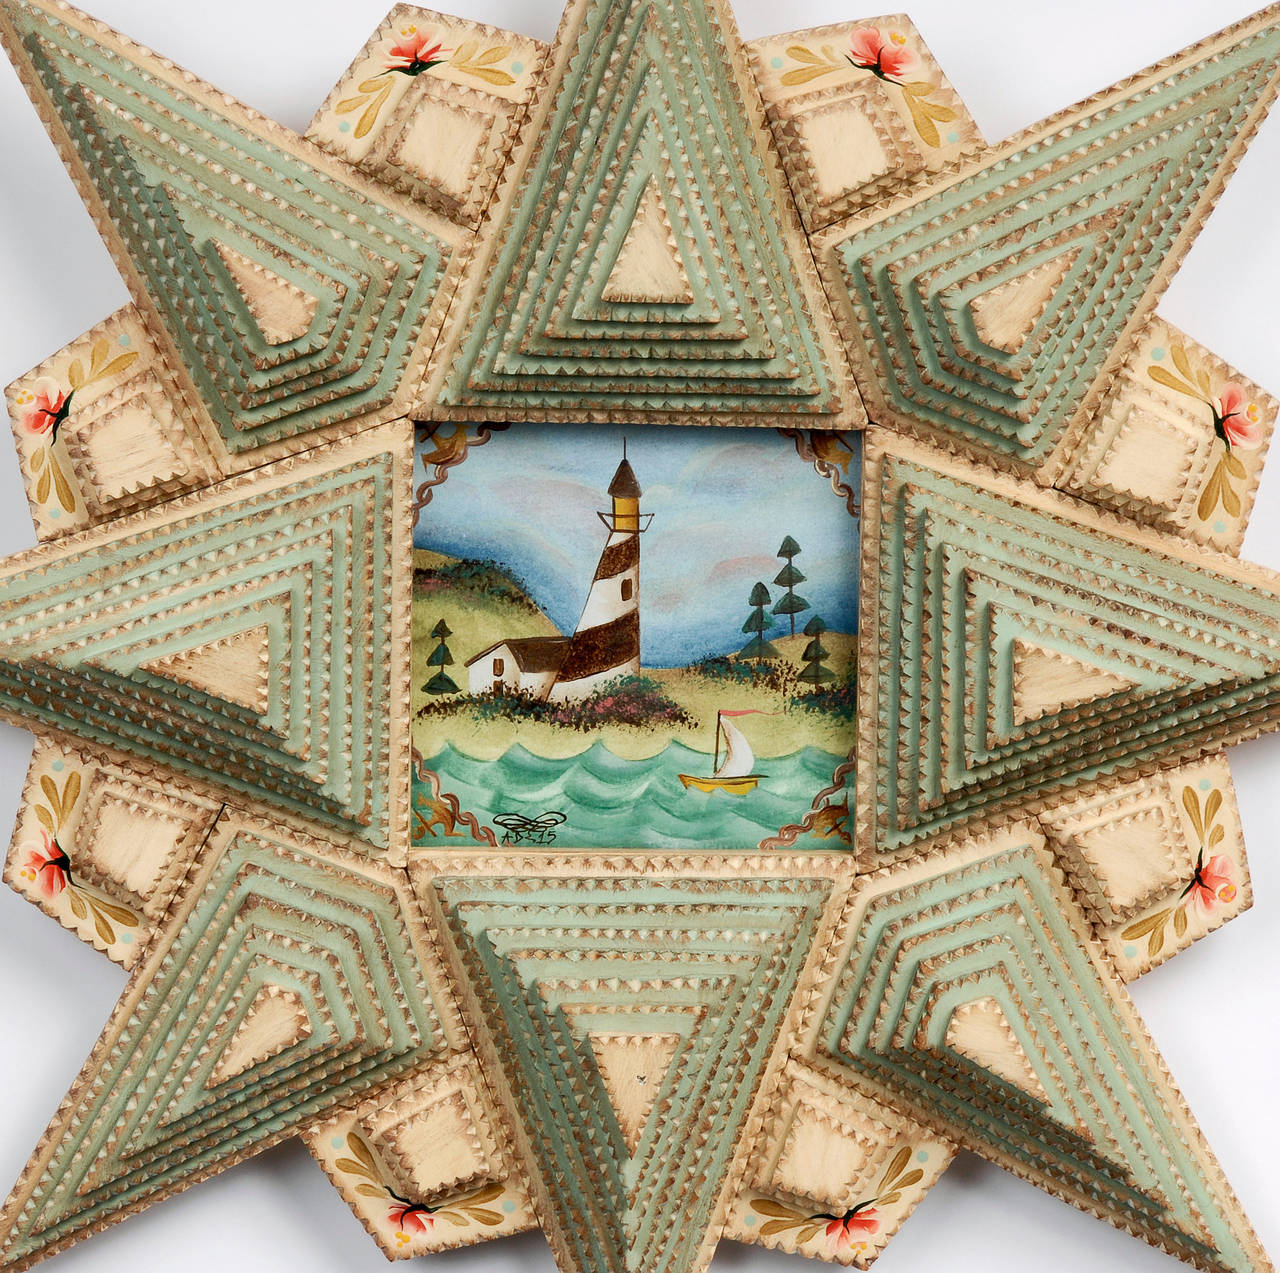 A wonderful detailed 'Sea Glass' Tramp Art star-shaped painted frame with a nautical themed painting by noted contemporary artist Angie Dow.